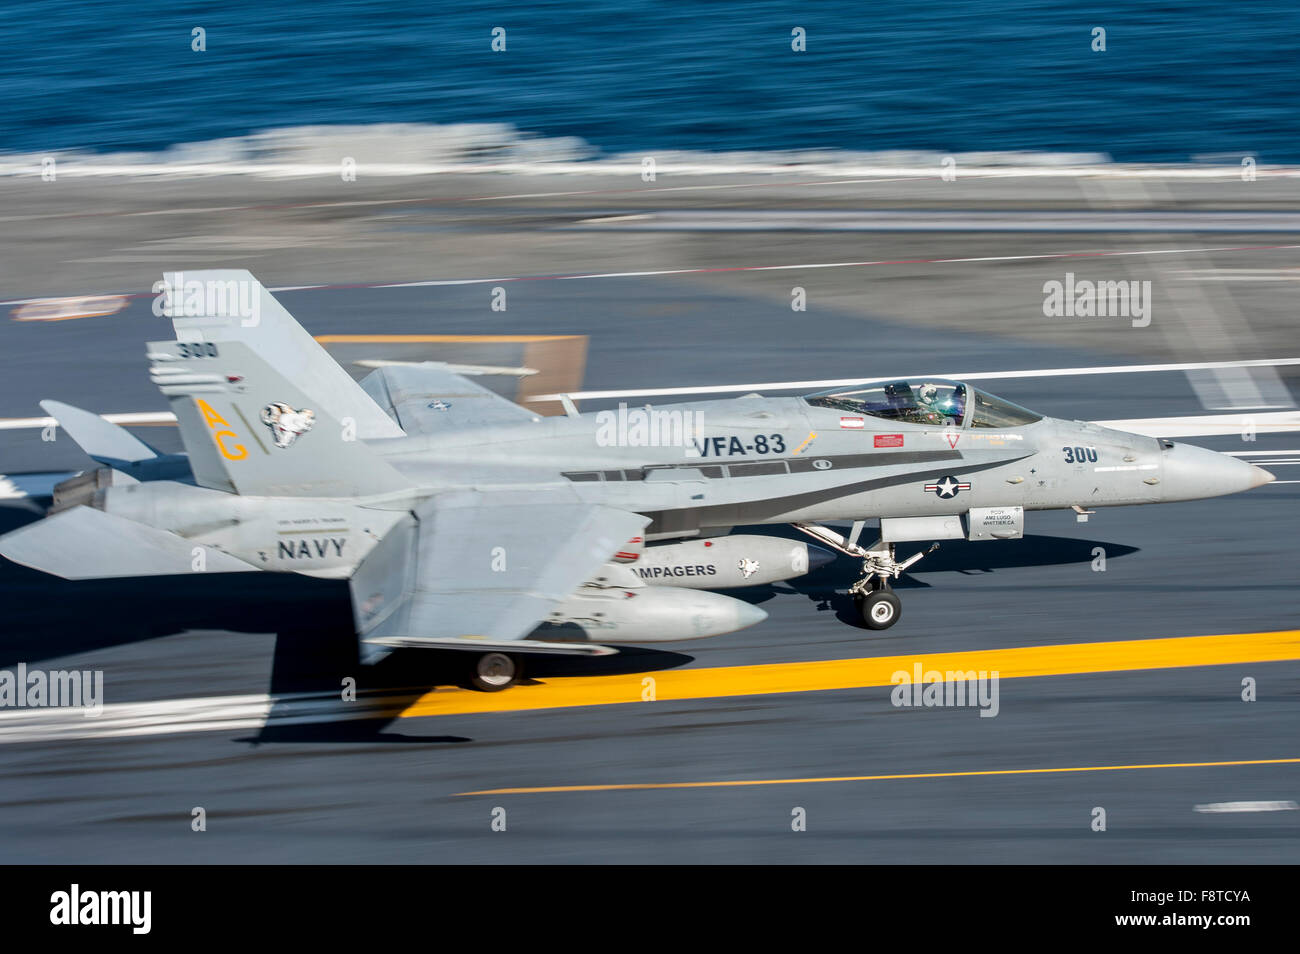 F/A-18C Hornet, assigned to the “Rampagers” of Strike Fighter Squadron (VFA) 83, lands on the flight deck of aircraft carrier USS Harry S. Truman Stock Photo